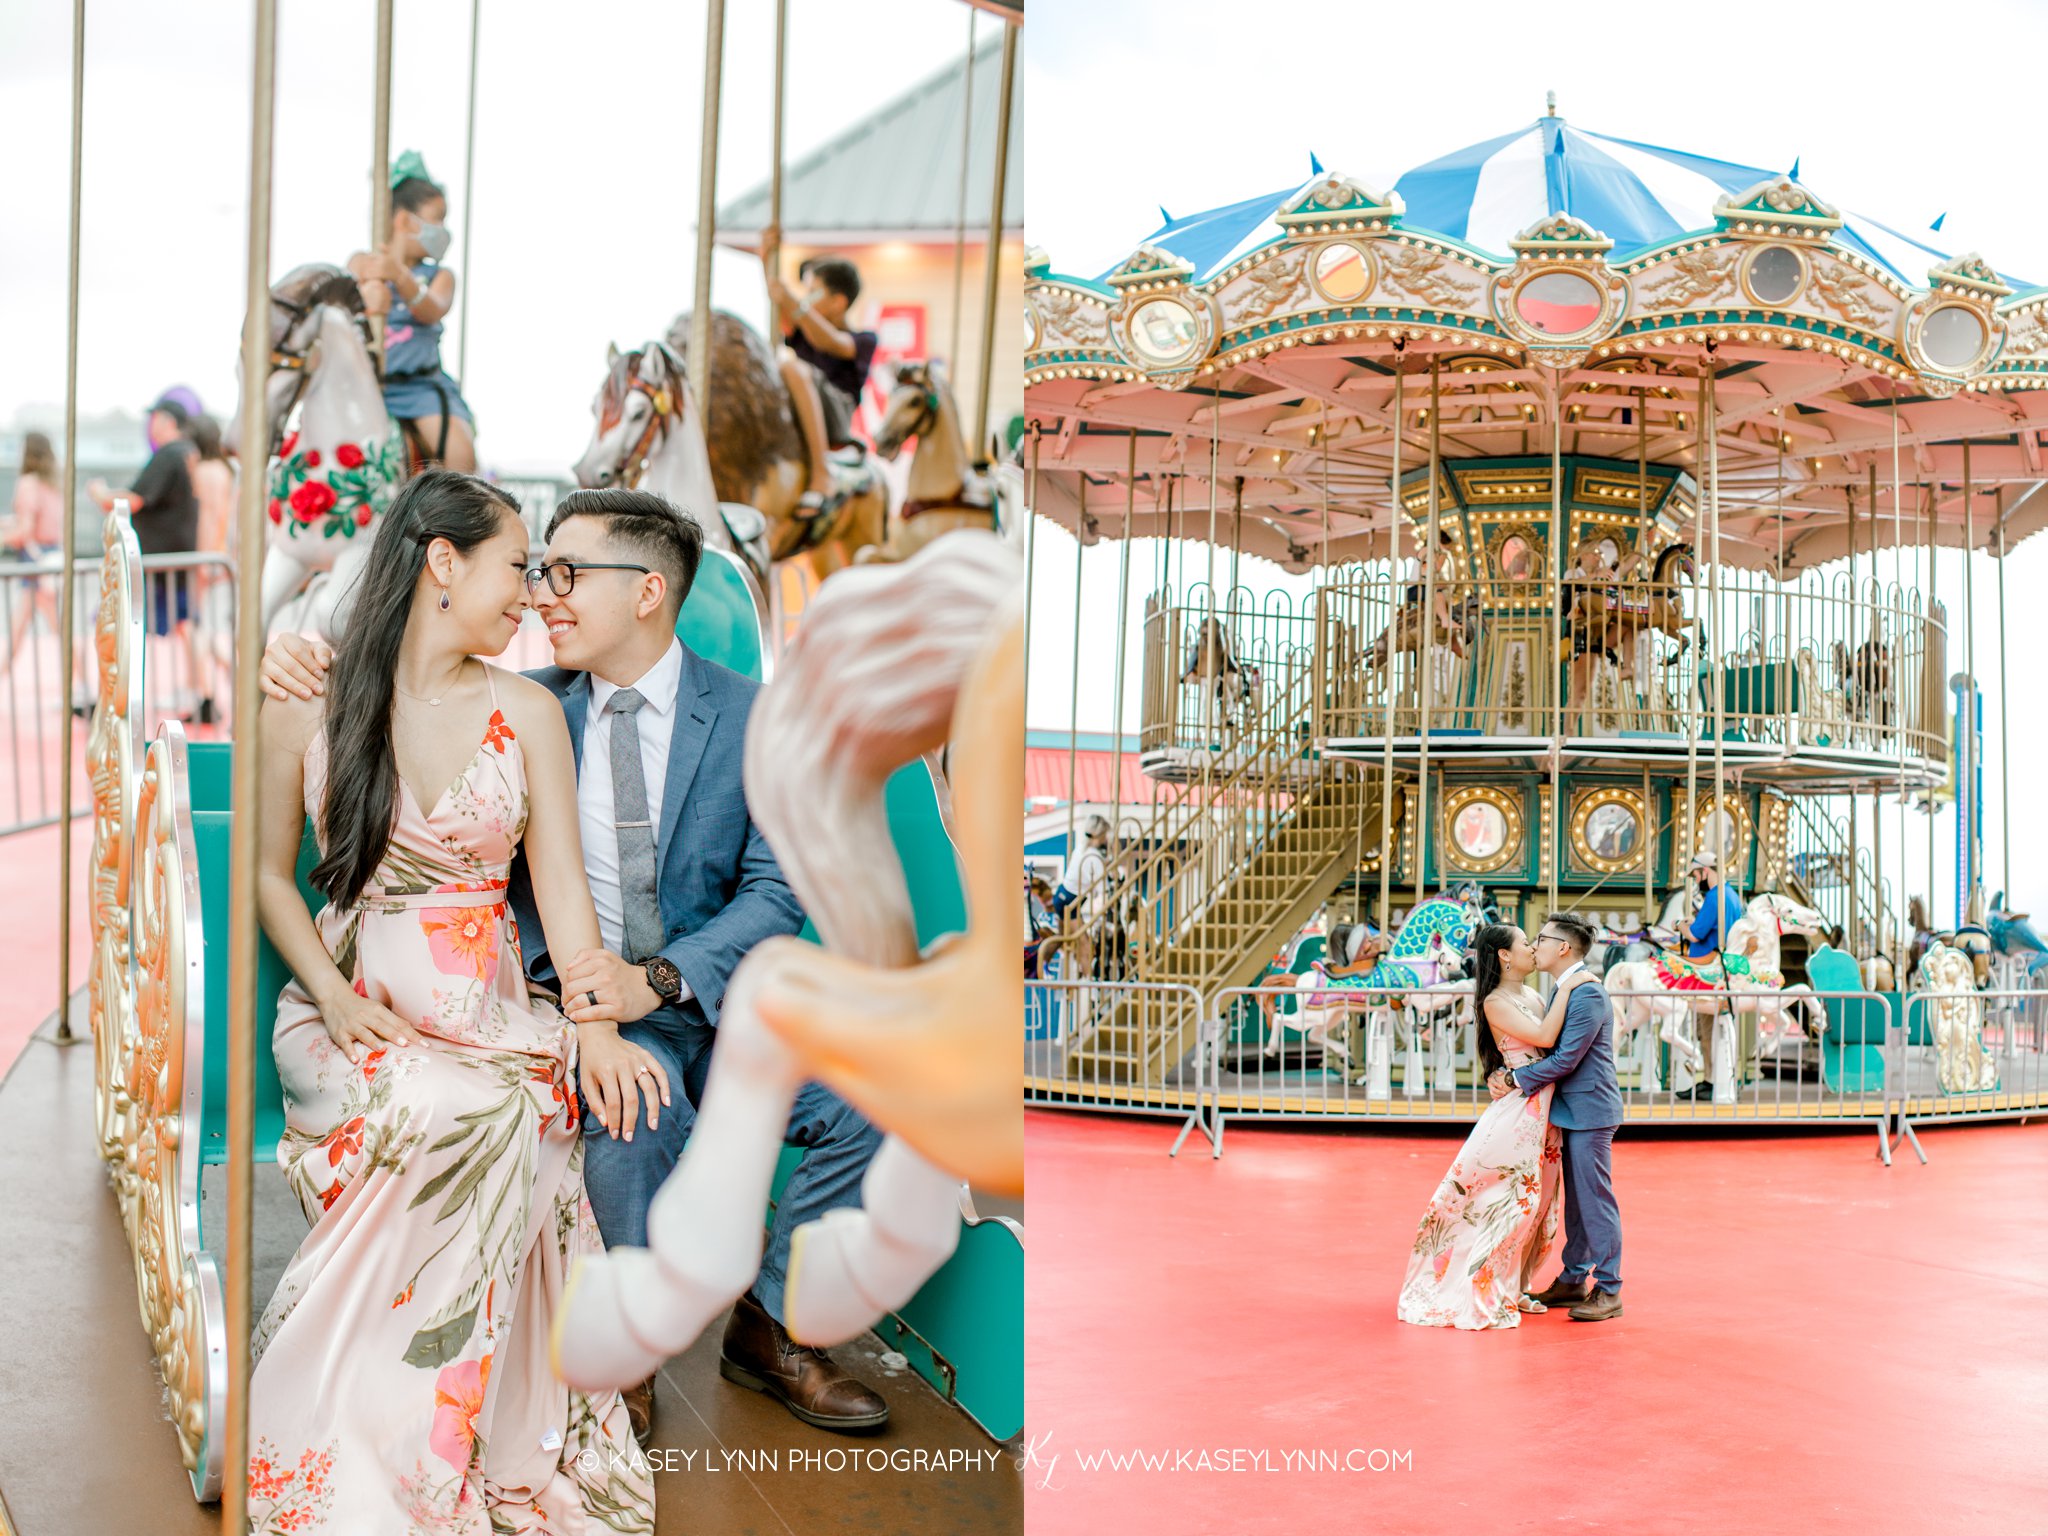 Carnival Engagement Session / Kasey Lynn Photography